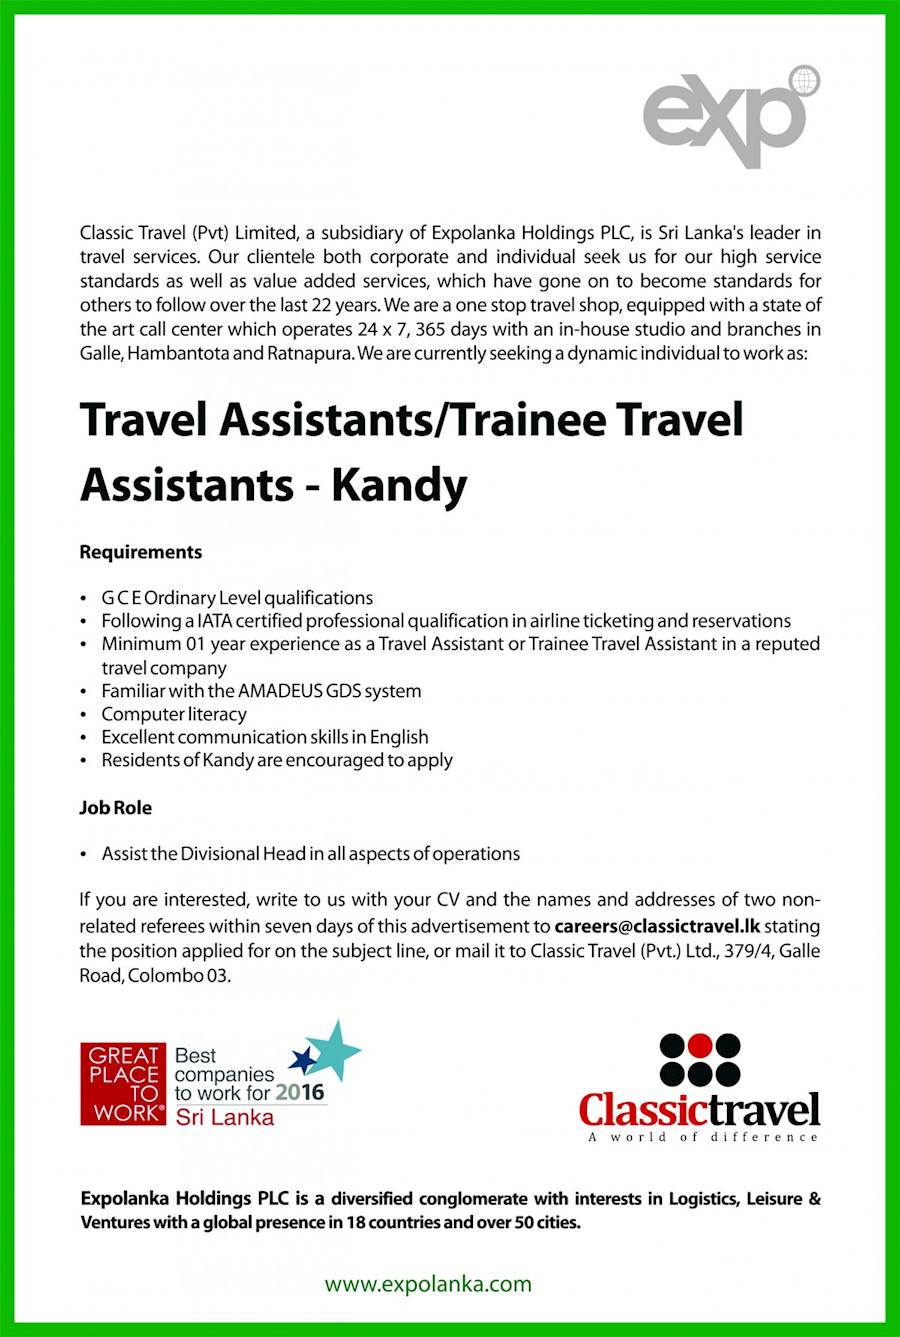 TRAVEL ASSISTANTS or TRAINEE TRAVEL ASSISTANTS - KANDY at EXPOLANKA 